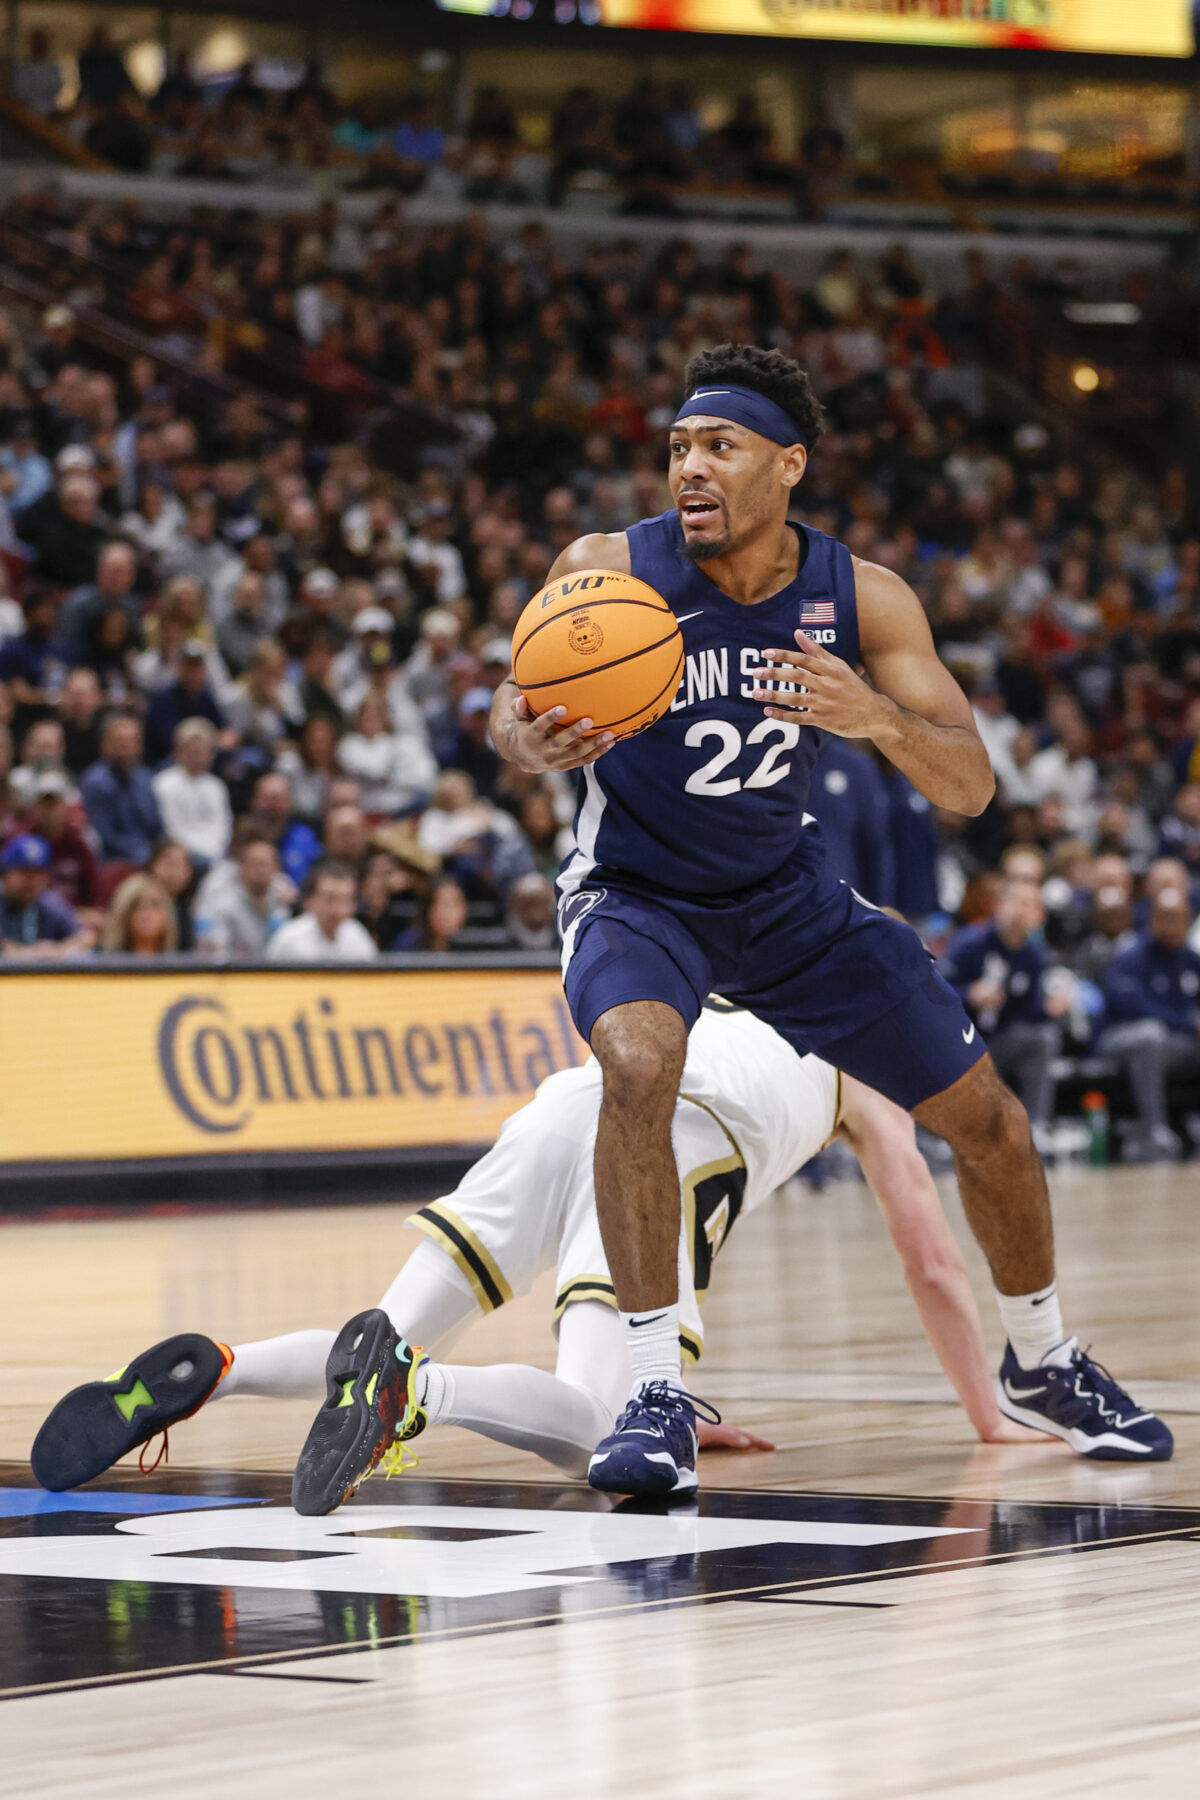 Twitter reacts to Penn State’s NCAA Tournament announcement